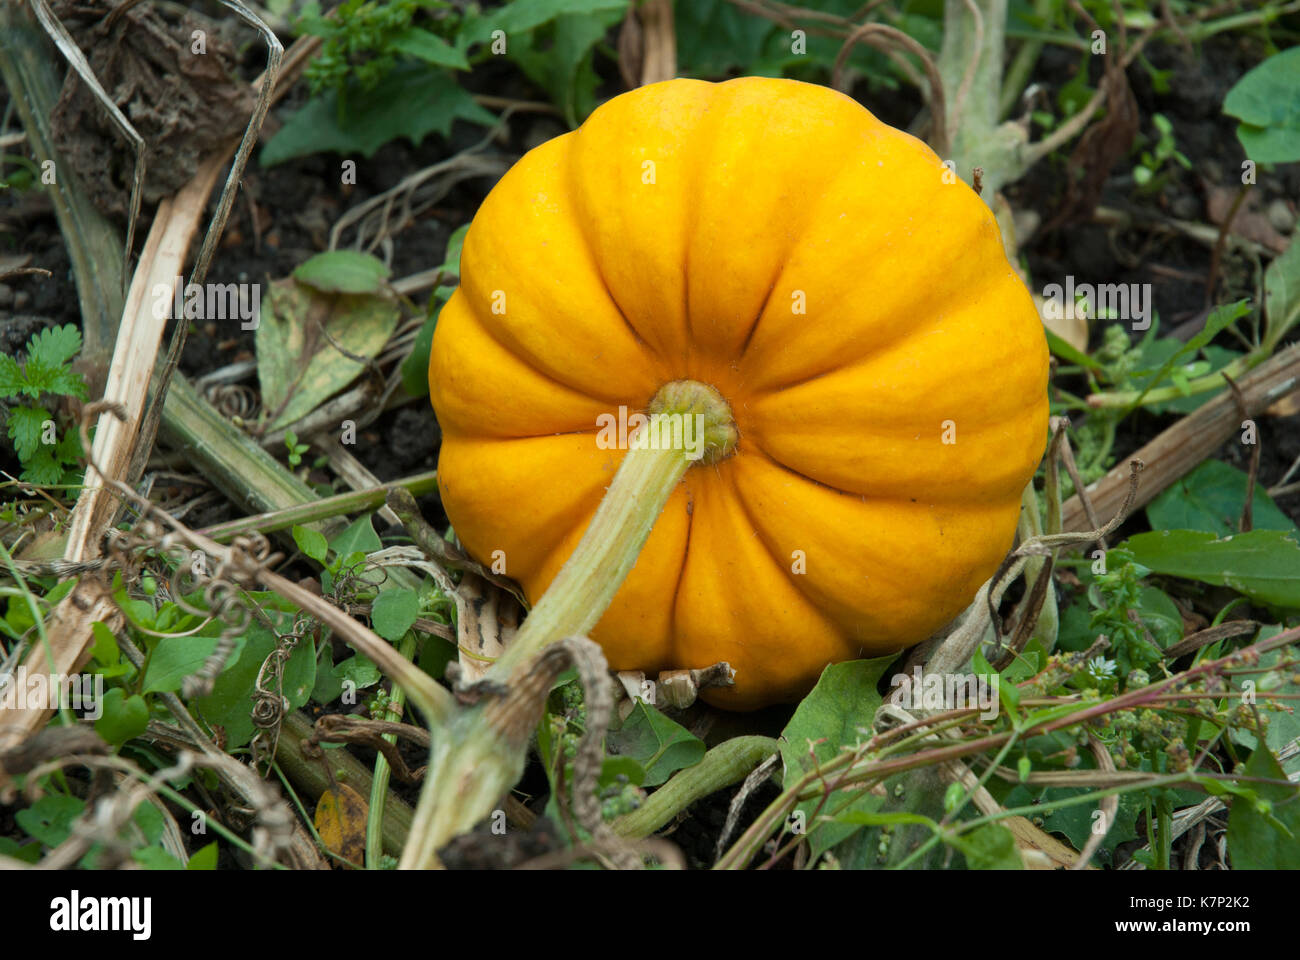 Bright orange ribbed squash growing leaves on the ground. Stock Photo